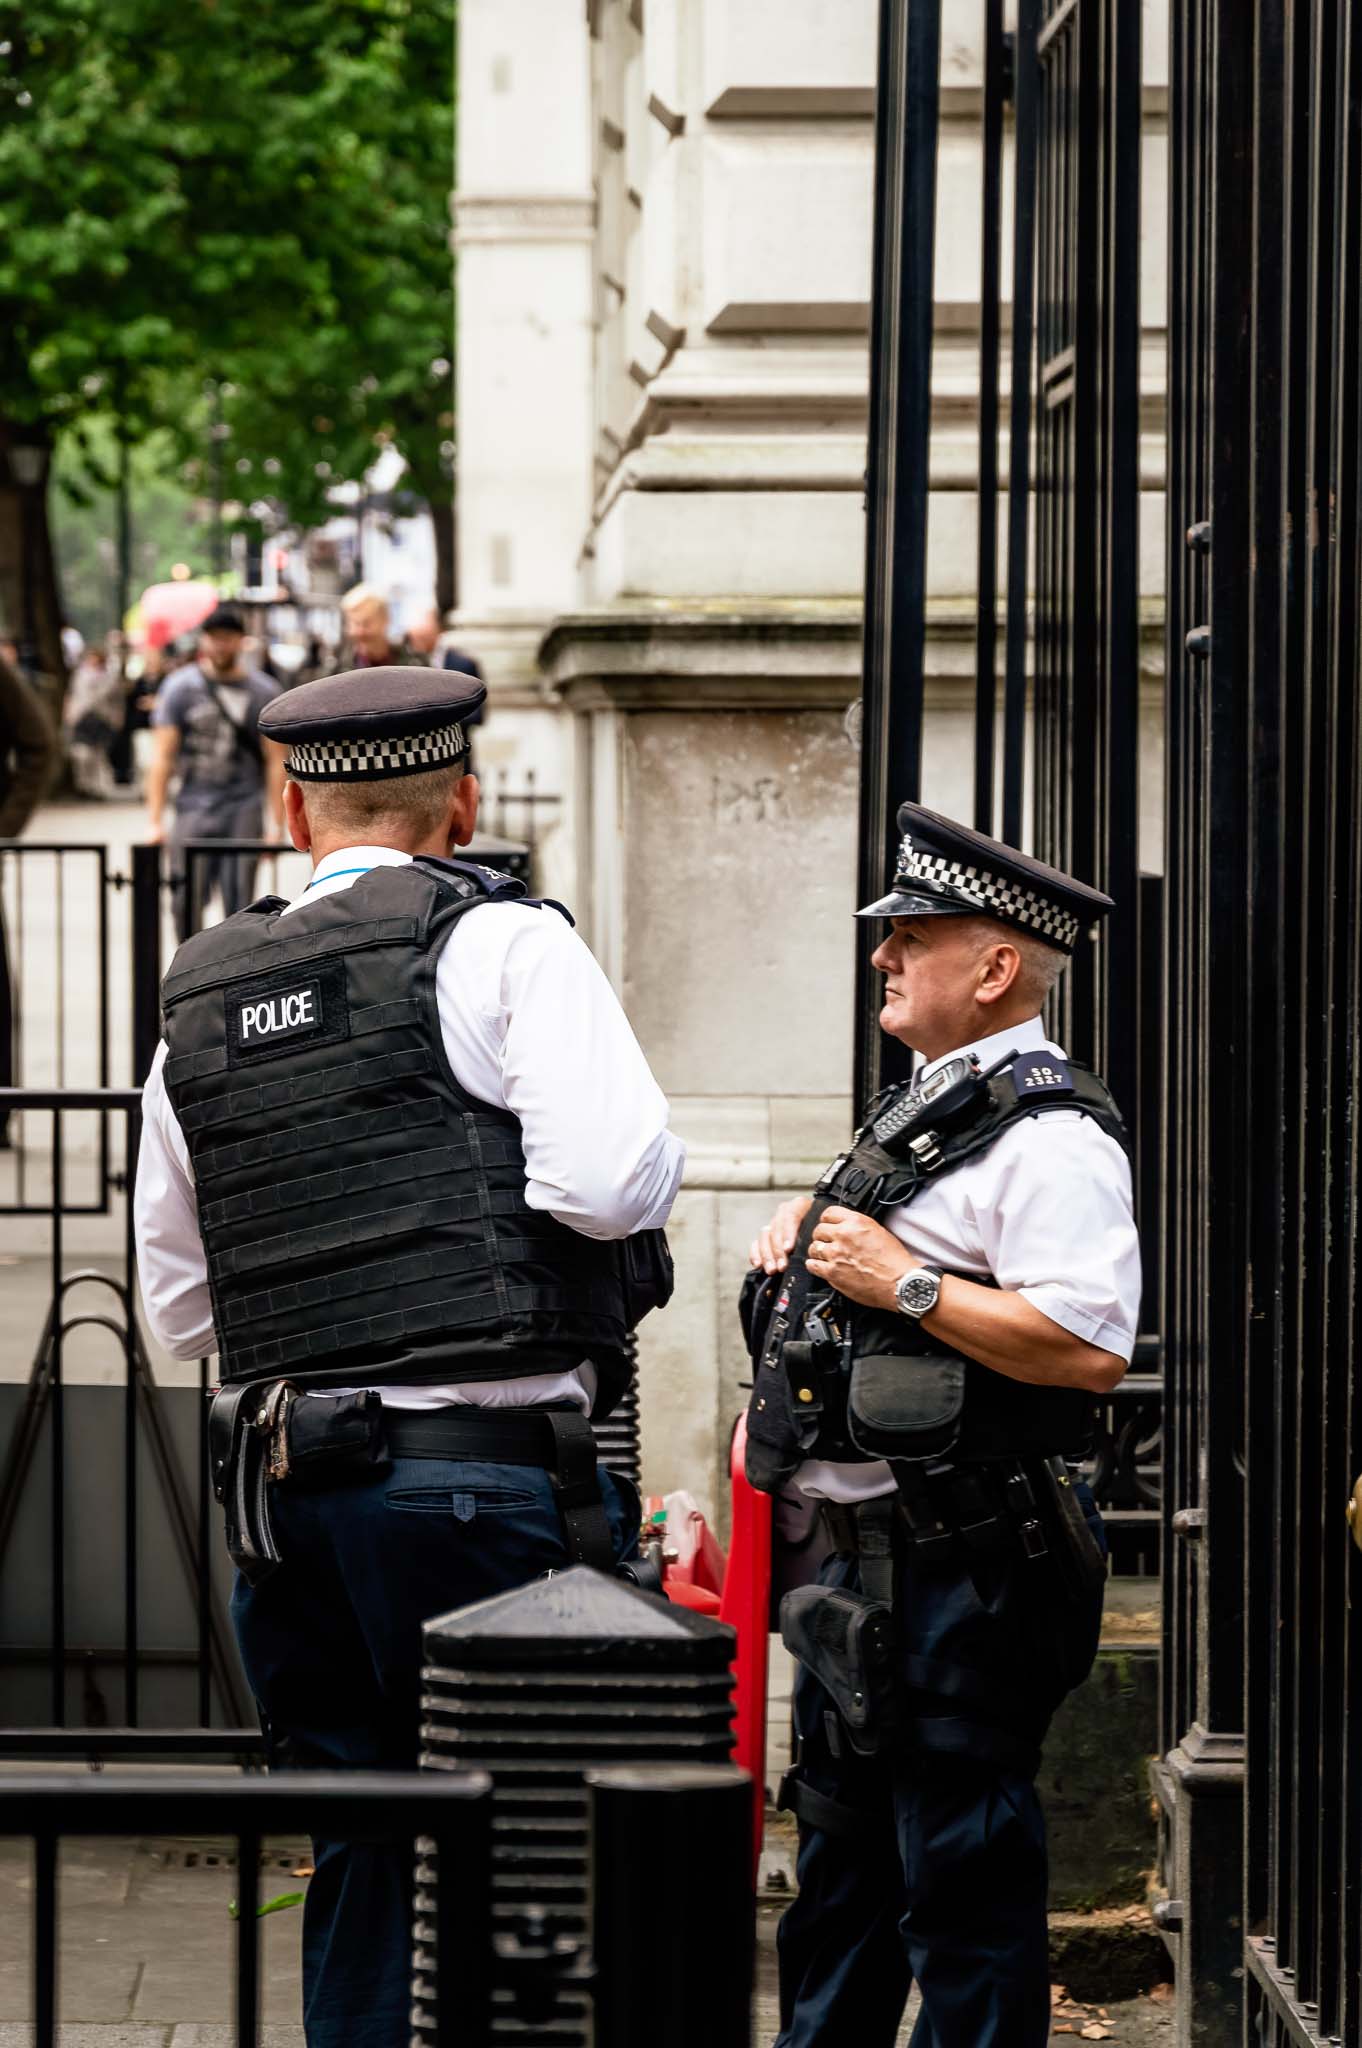 Police officer protects the Downing Street in London